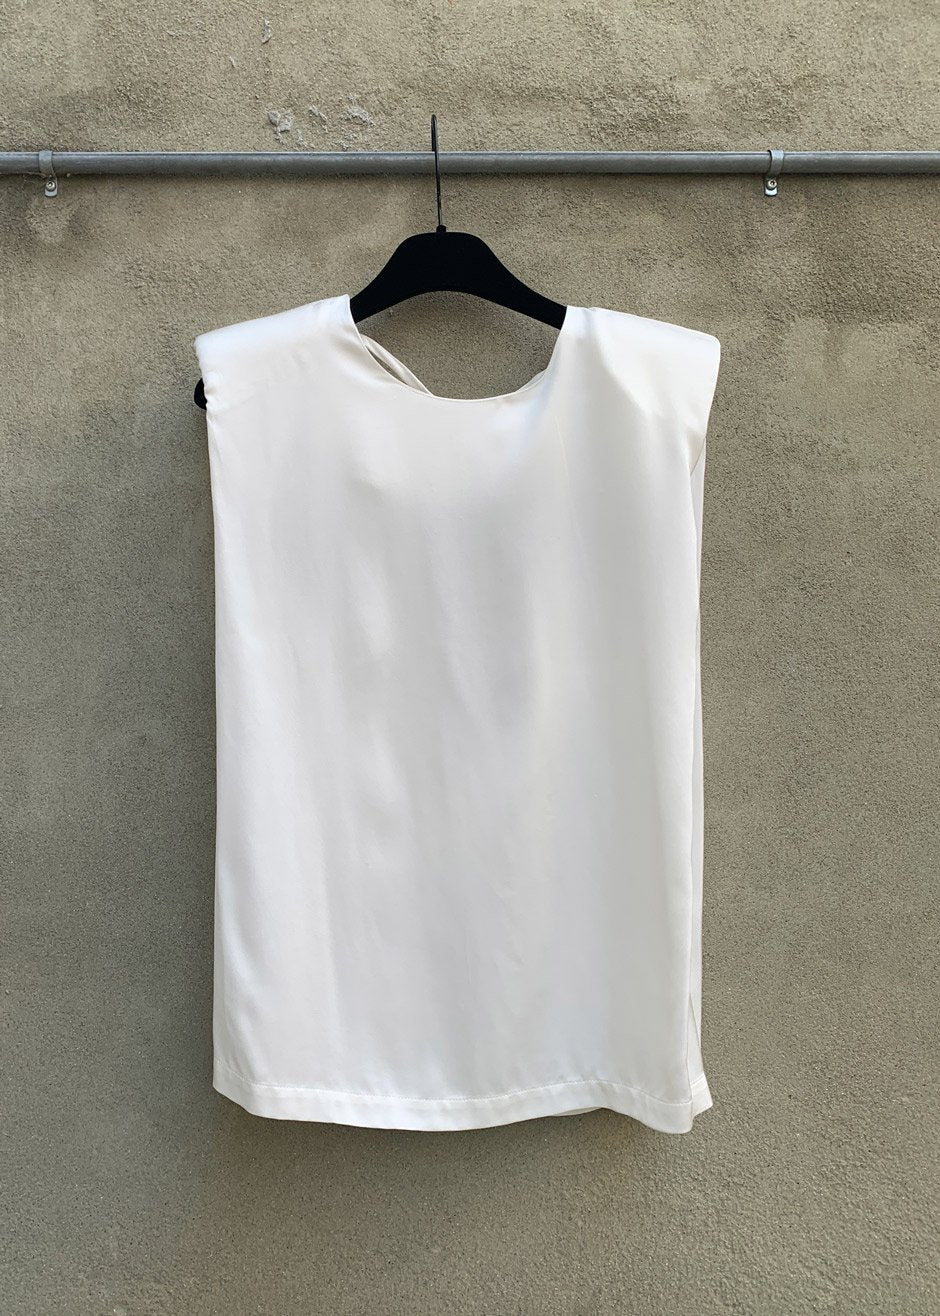 Secretary Muscle Tee by The Garment in Cream